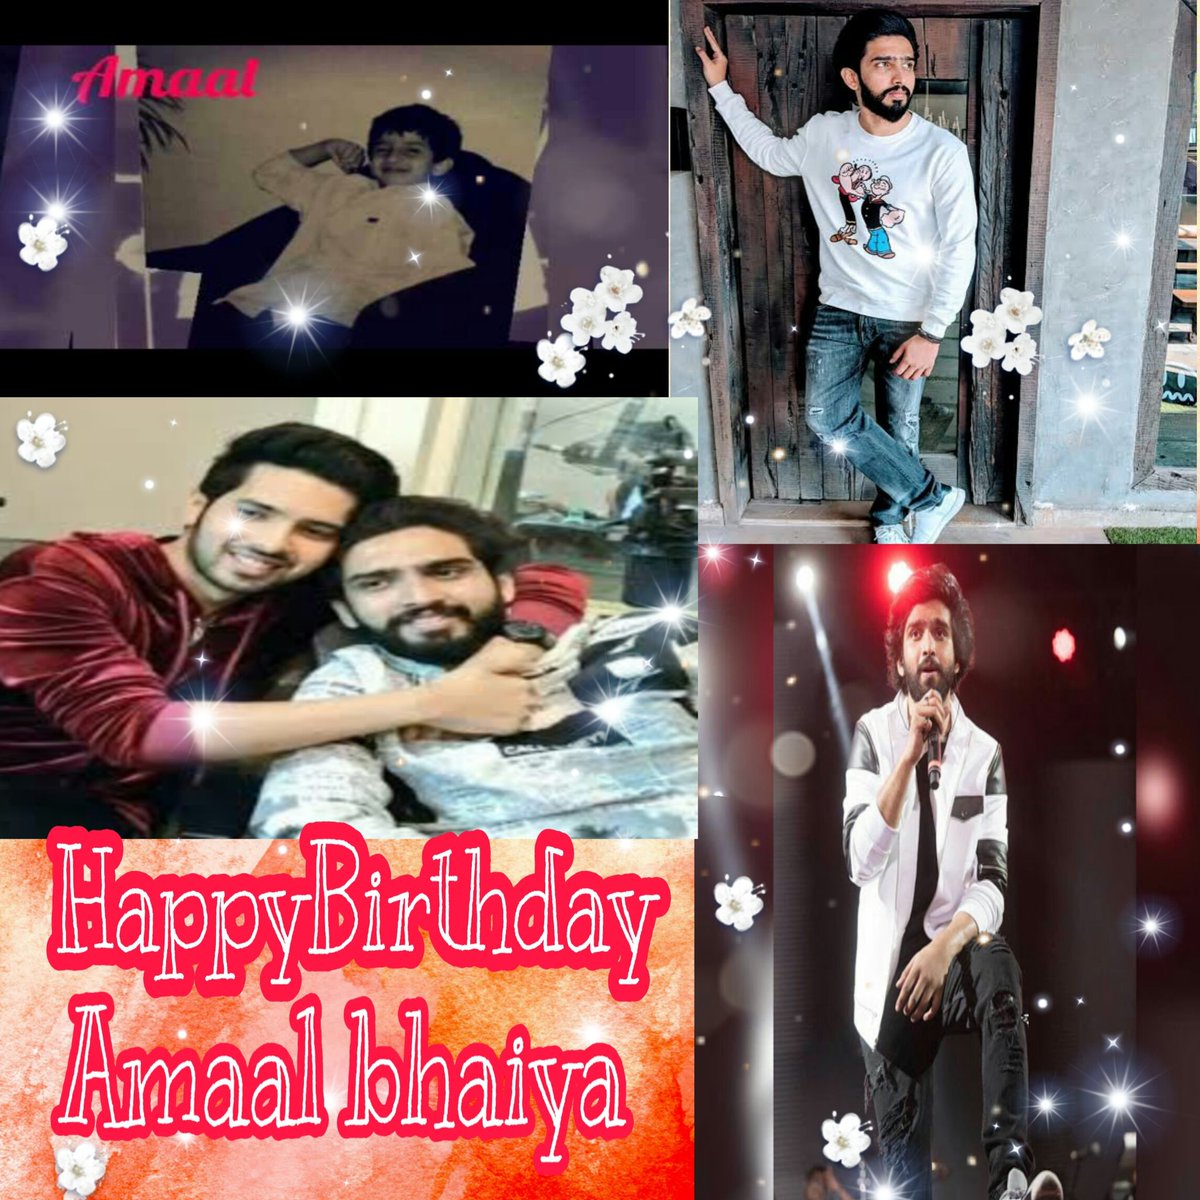 The best day of the year has arrived. So let's us celebrate it with lots of joy😍😍🤗😋
       Happy birthday @AmaalMallik bhaiya🎂
#HappyBirthdayAmaalMallik

#HappyWalaBirthday #HappyBirthday #BestComposer #BestBrother #KingAM #HappyBirthdayAmlu #AmaalMallik